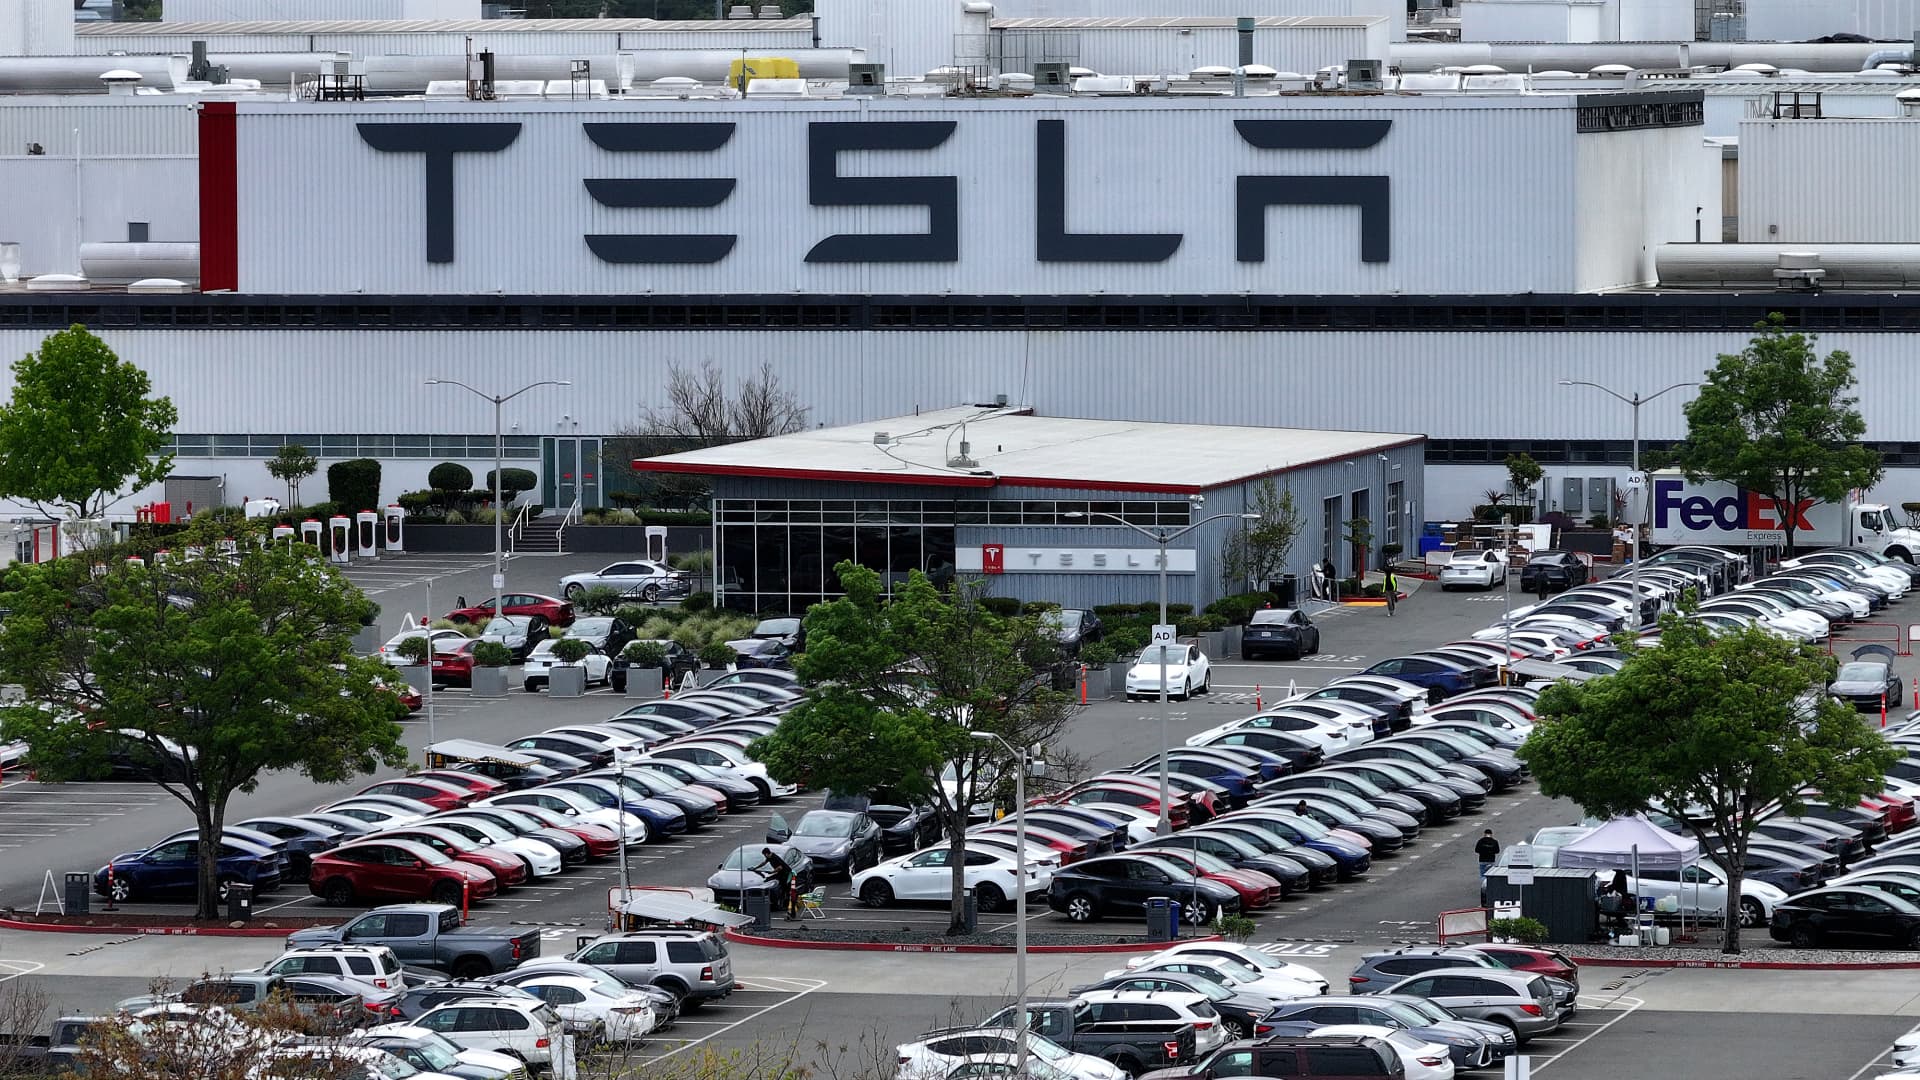 The Tesla Fremont factory suffers another fire, investigation is ongoing